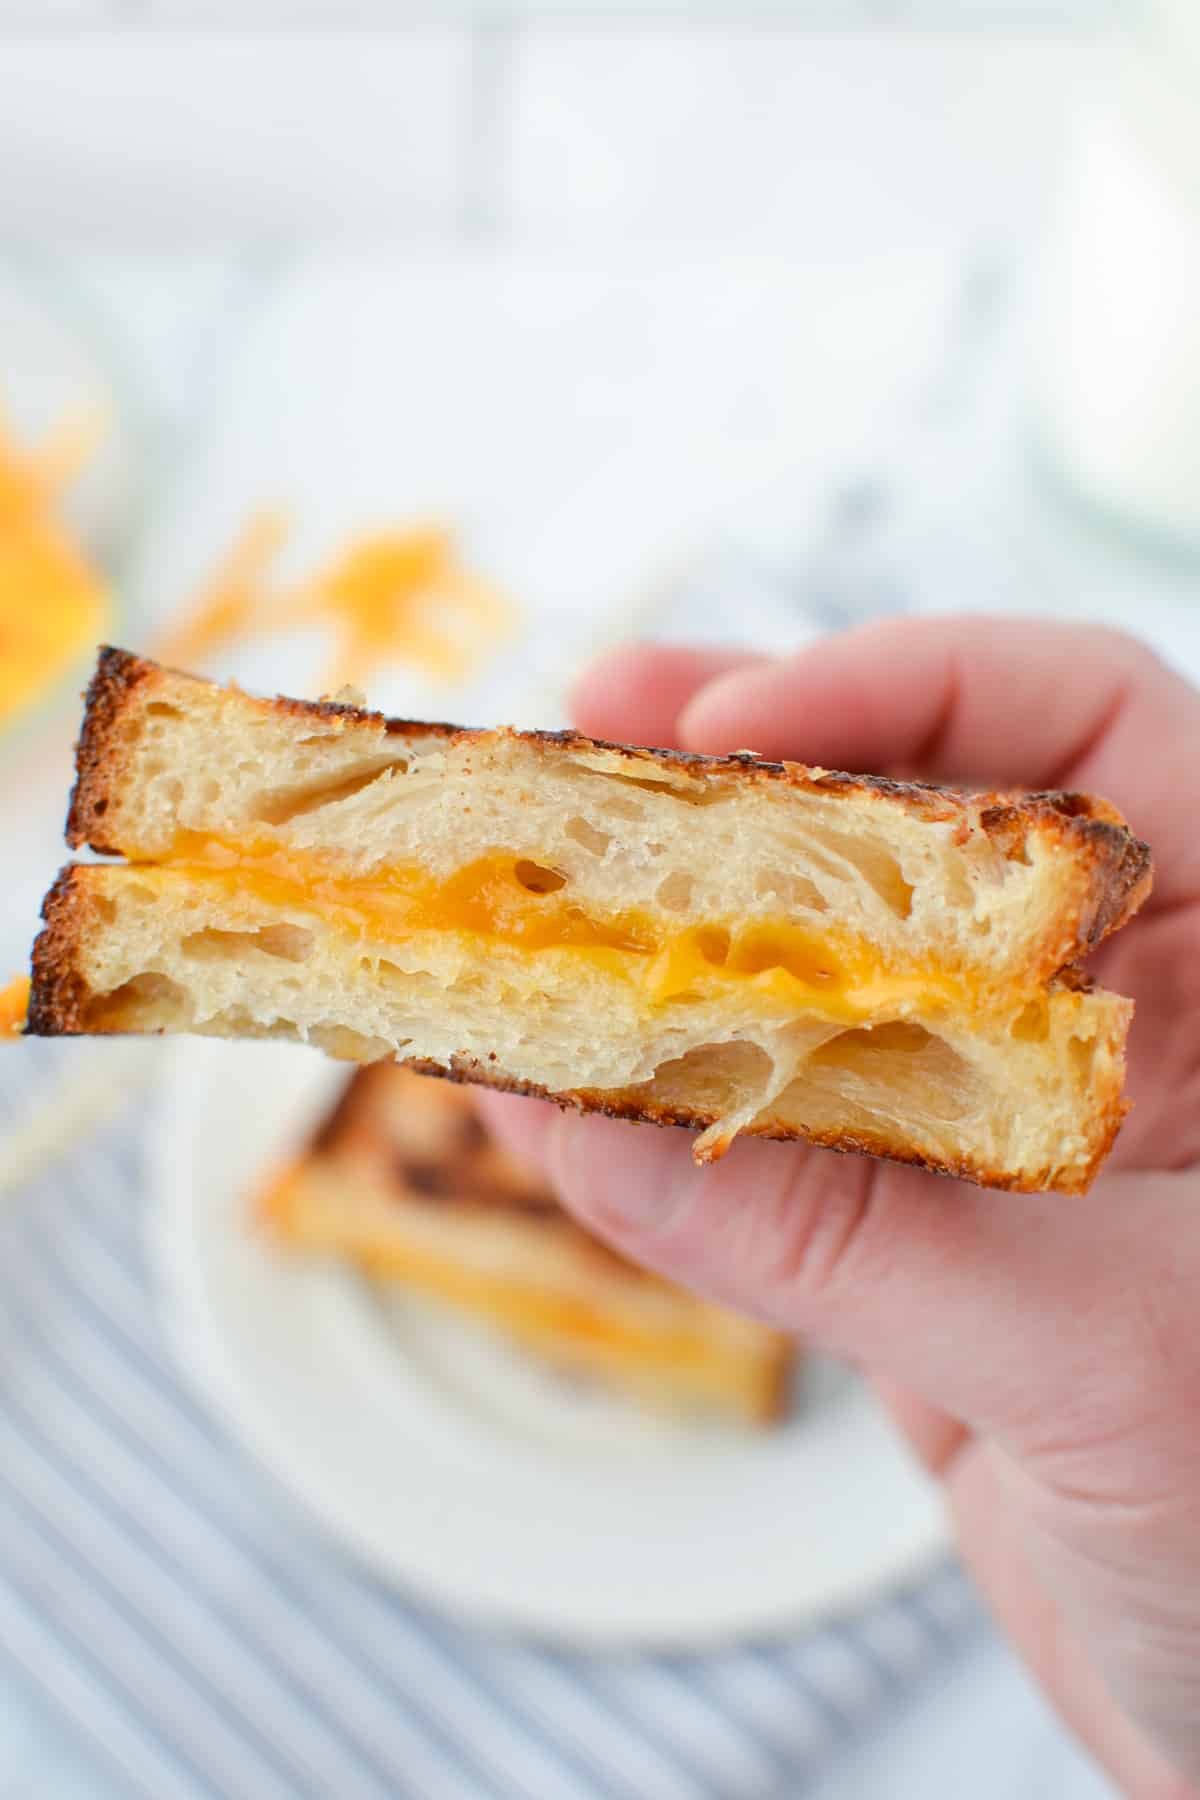 A close up of a grilled cheese sandwich.